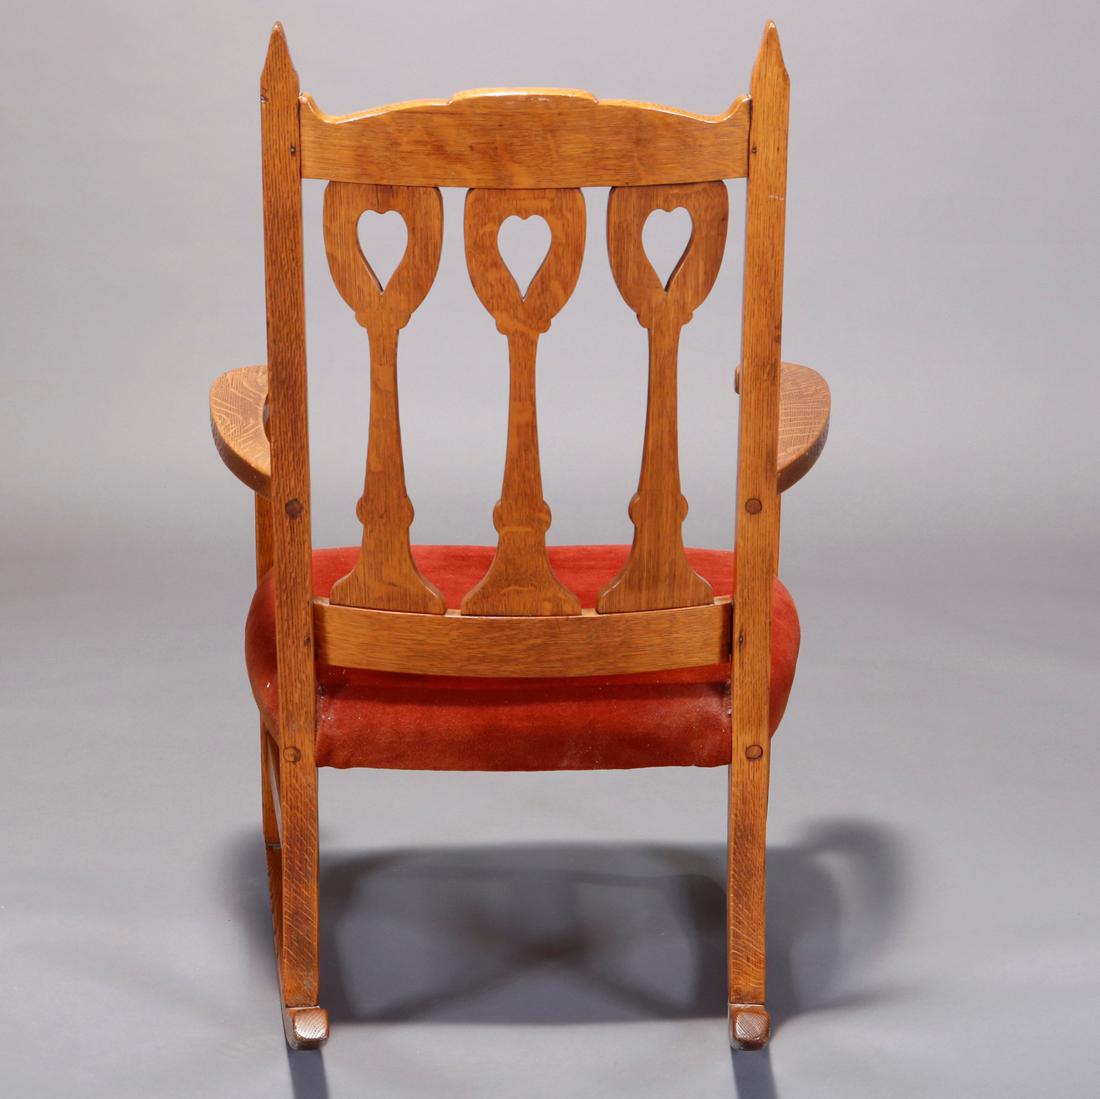 American Antique Arts & Crafts Mission Oak Rocker with Cut Out Back, Circa 1910